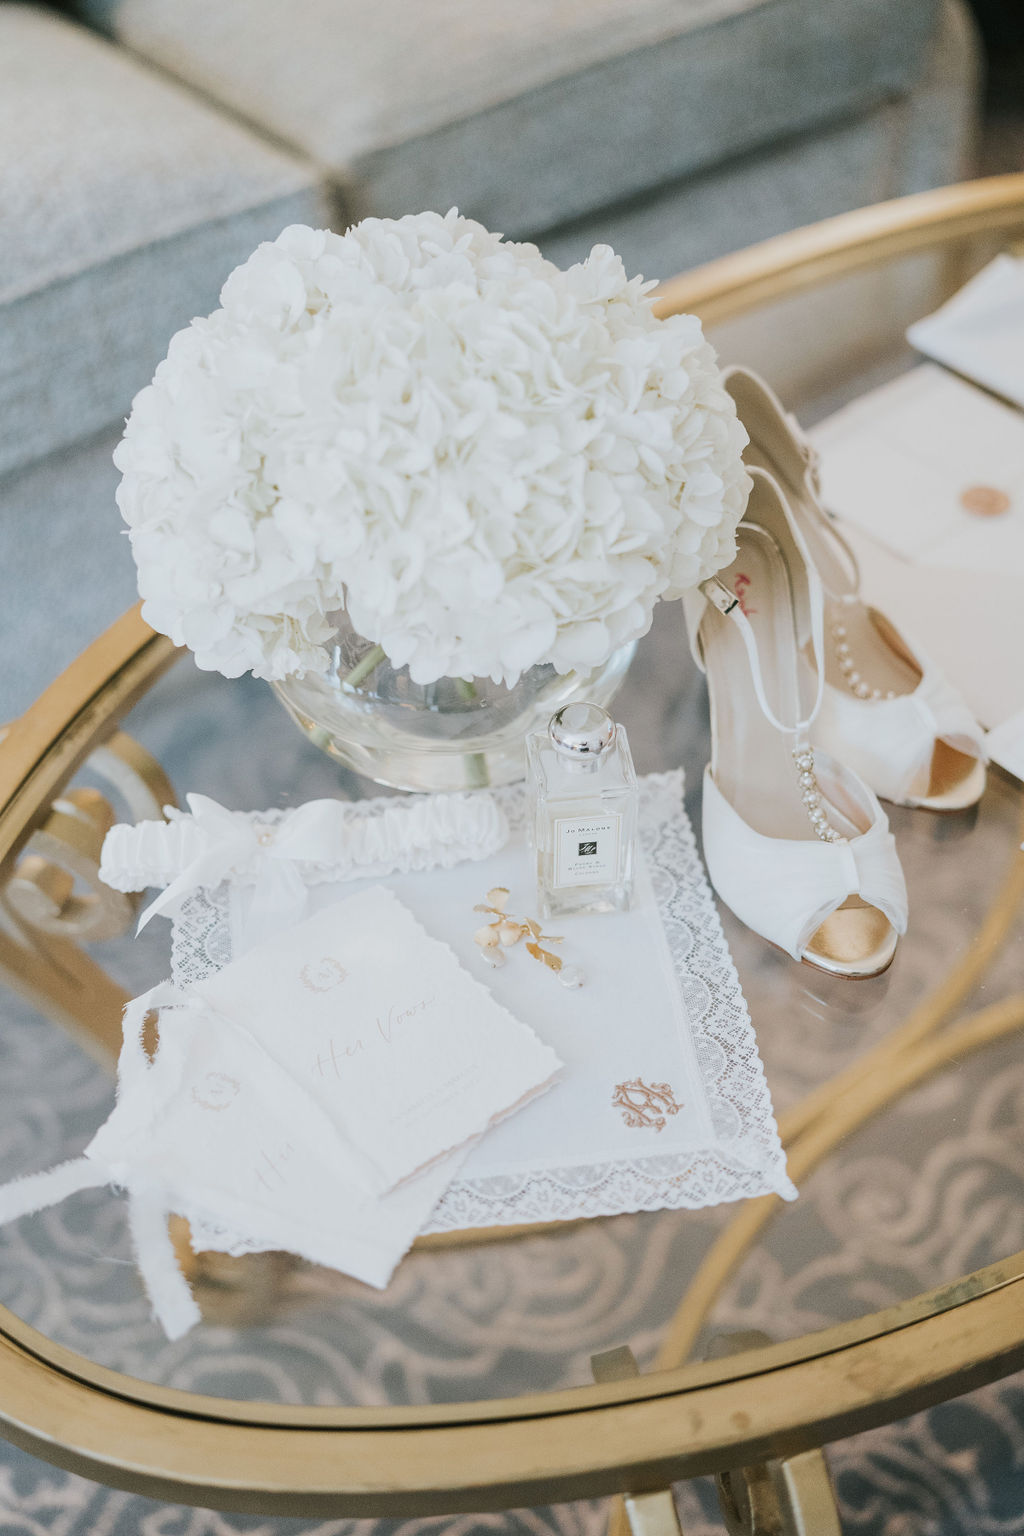 Chic City Wedding With Personalised Bridal Accessories